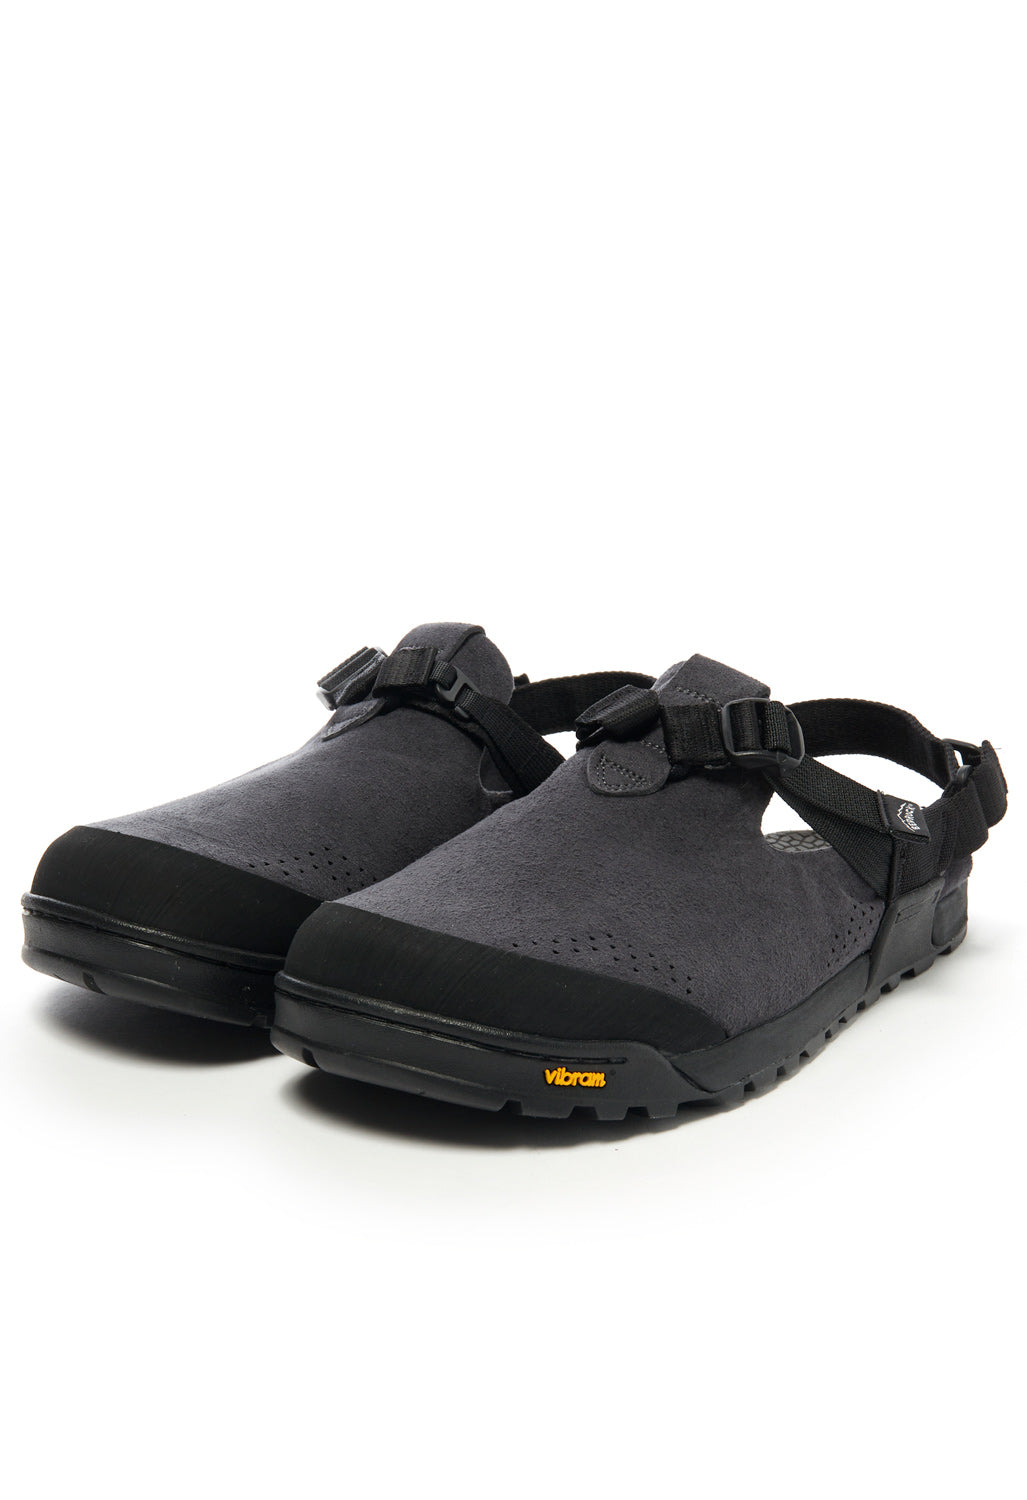 Bedrock Sandals Mountain Clog - Grey Synthetic Suede